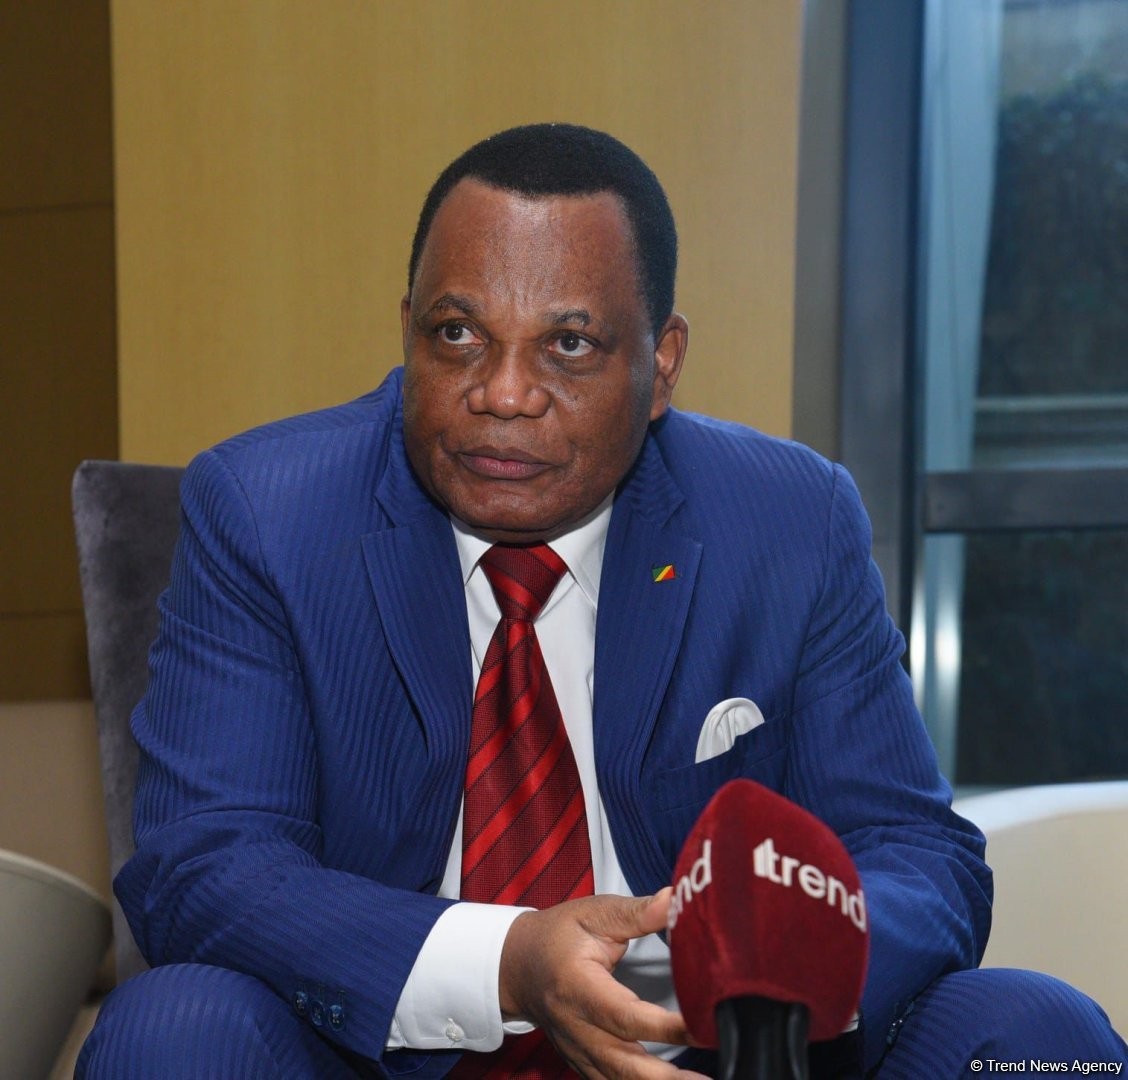 The Republic of Congo wants to take advantage of Azerbaijan`s experience in green energy - foreign minister (Exclusive interview)